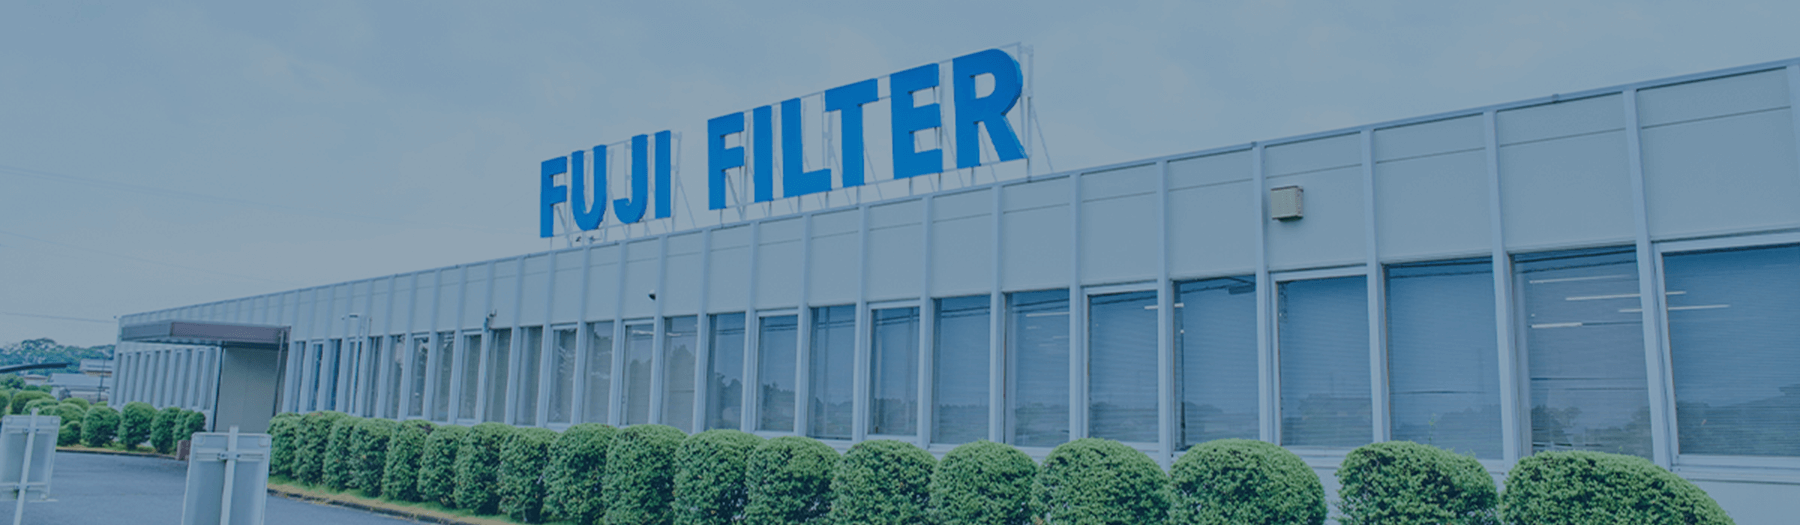 https://www.fujifilter.co.jp/wp-content/themes/fujifilter/assets/images/pages/company/links-plant-tour.png